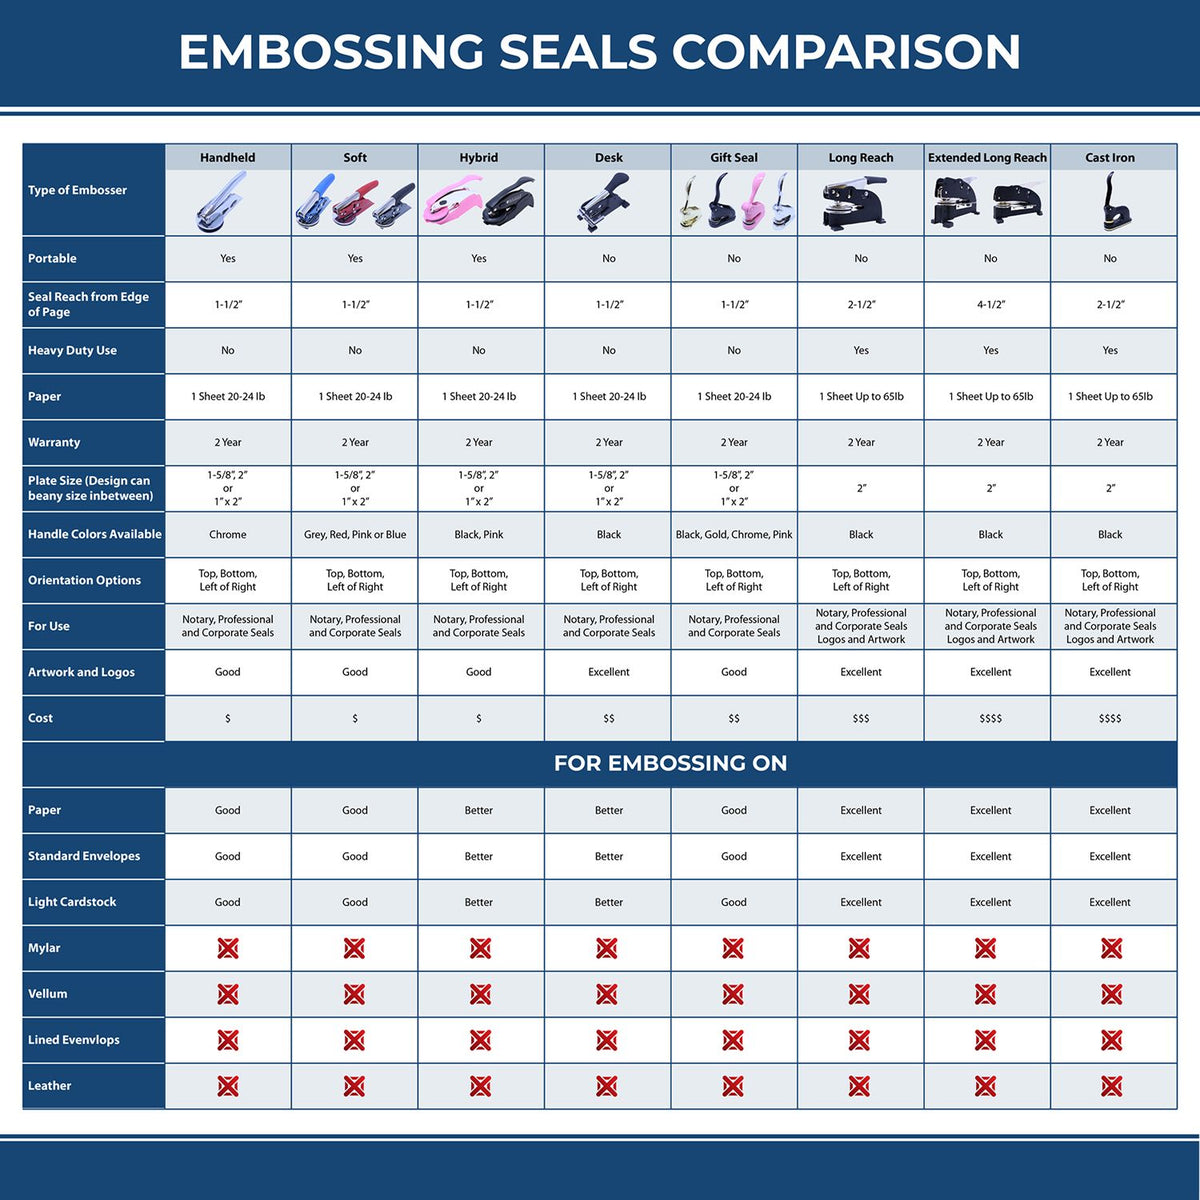 A comparison chart for the different types of mount models available for the Heavy Duty Cast Iron Michigan Geologist Seal Embosser